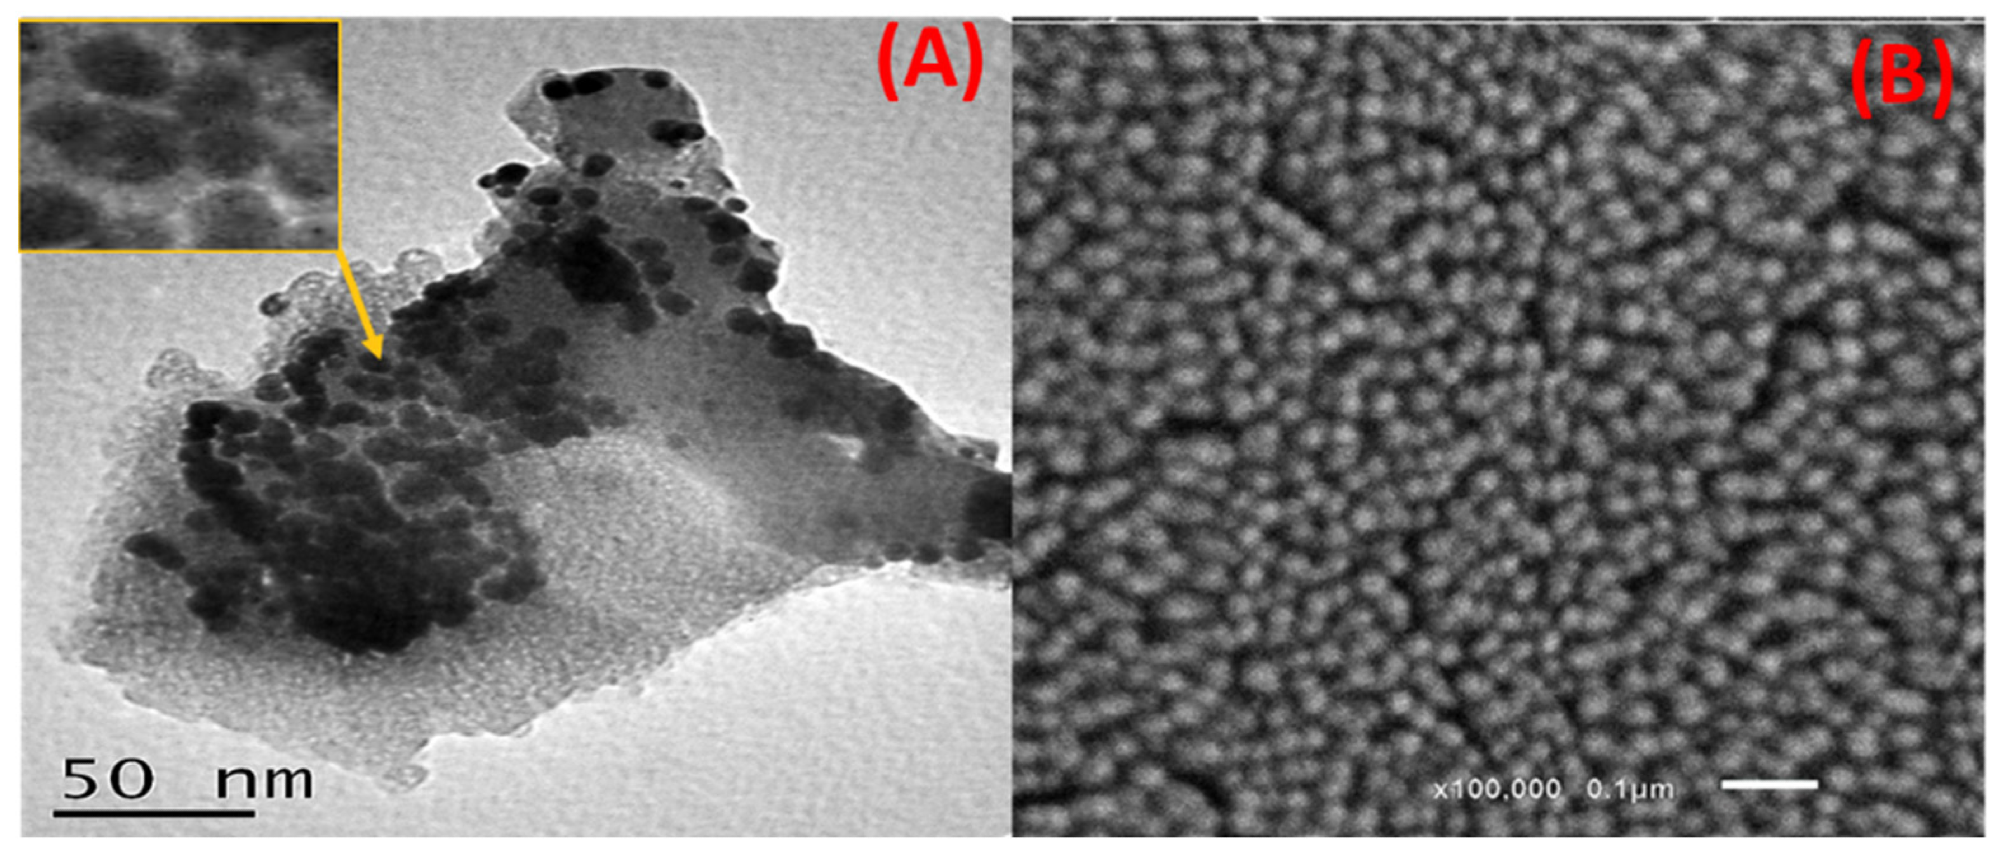 (A) HRTEM and (B) SEM images of the capped Ag NPs.